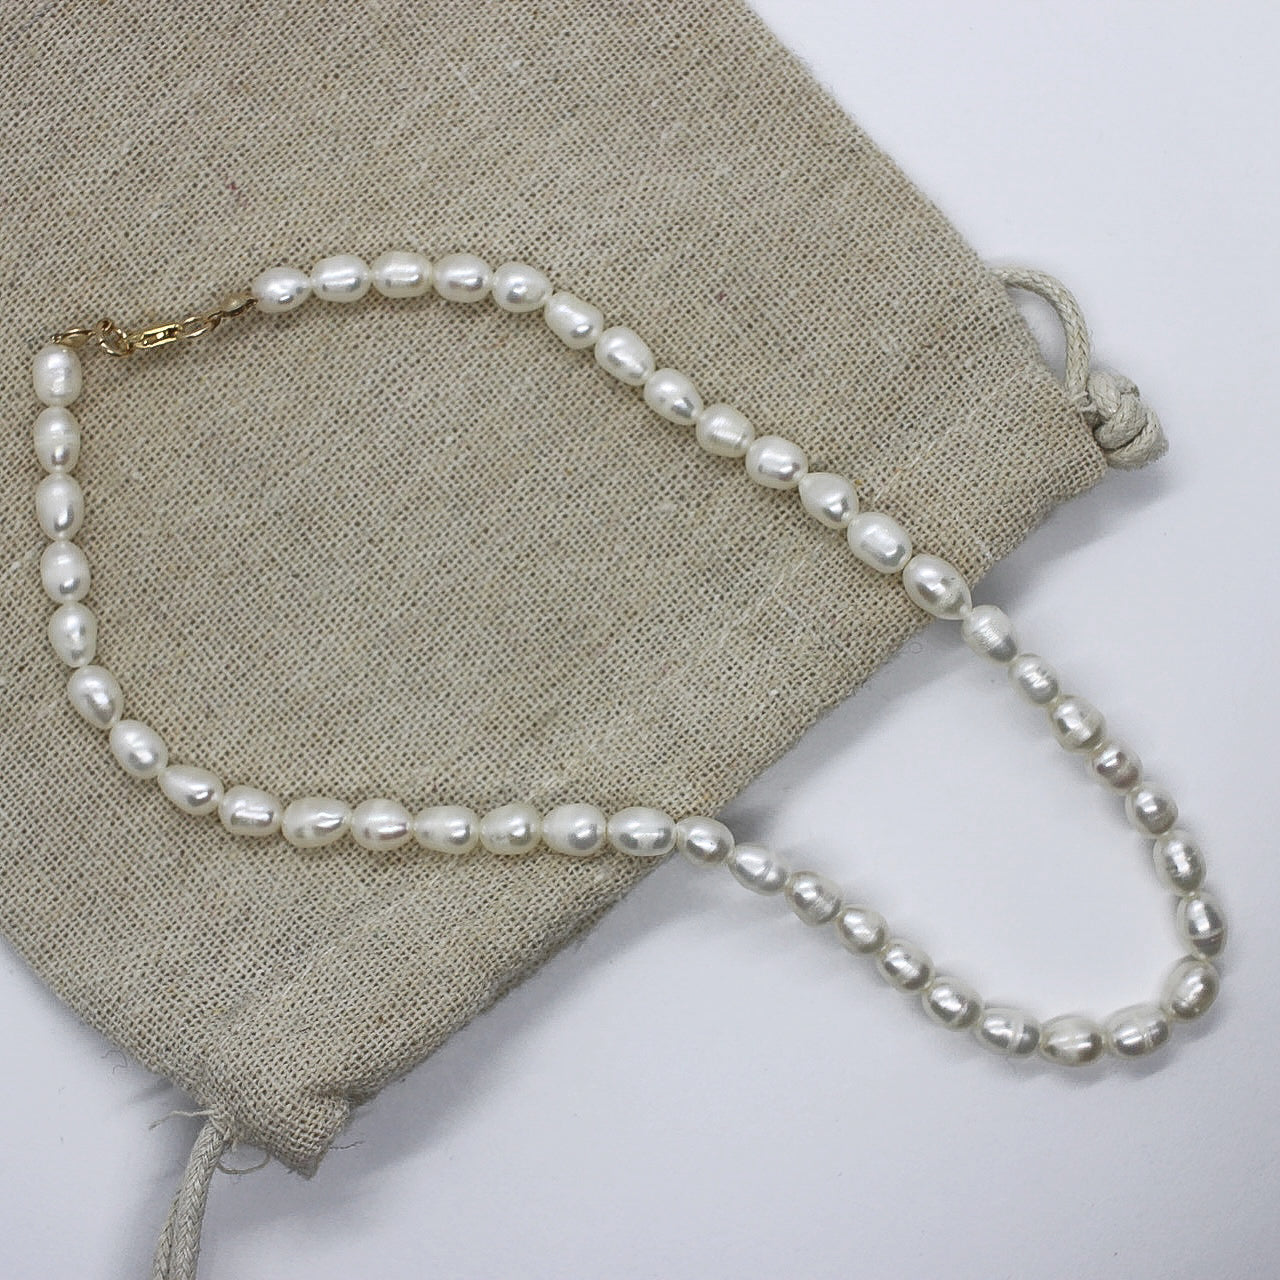 The Pearl Necklace by Surf & Stone